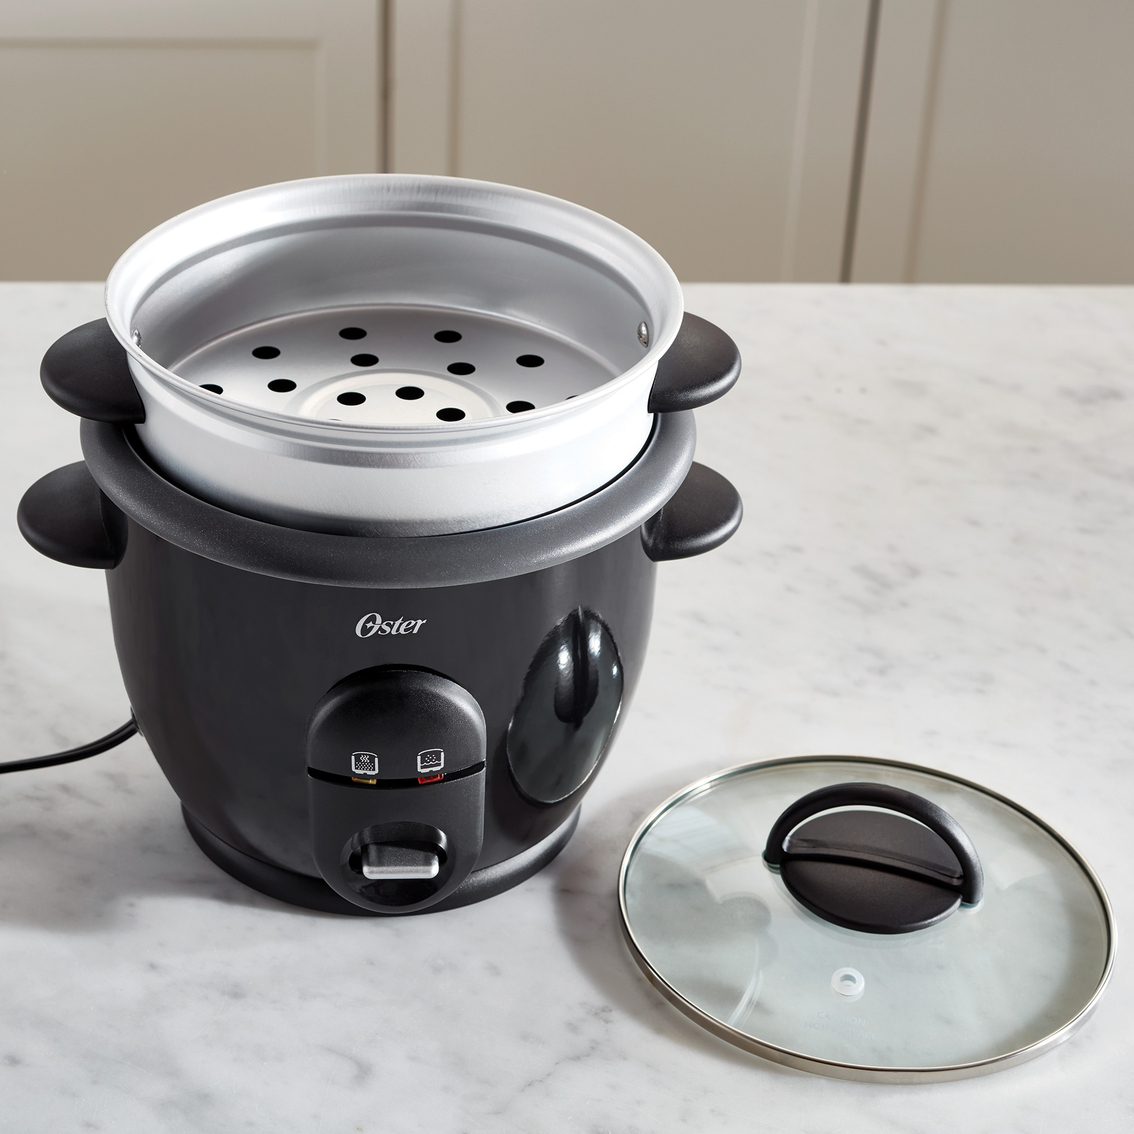 Oster DiamondForce Nonstick 6 Cup Electric Rice Cooker - Image 3 of 4